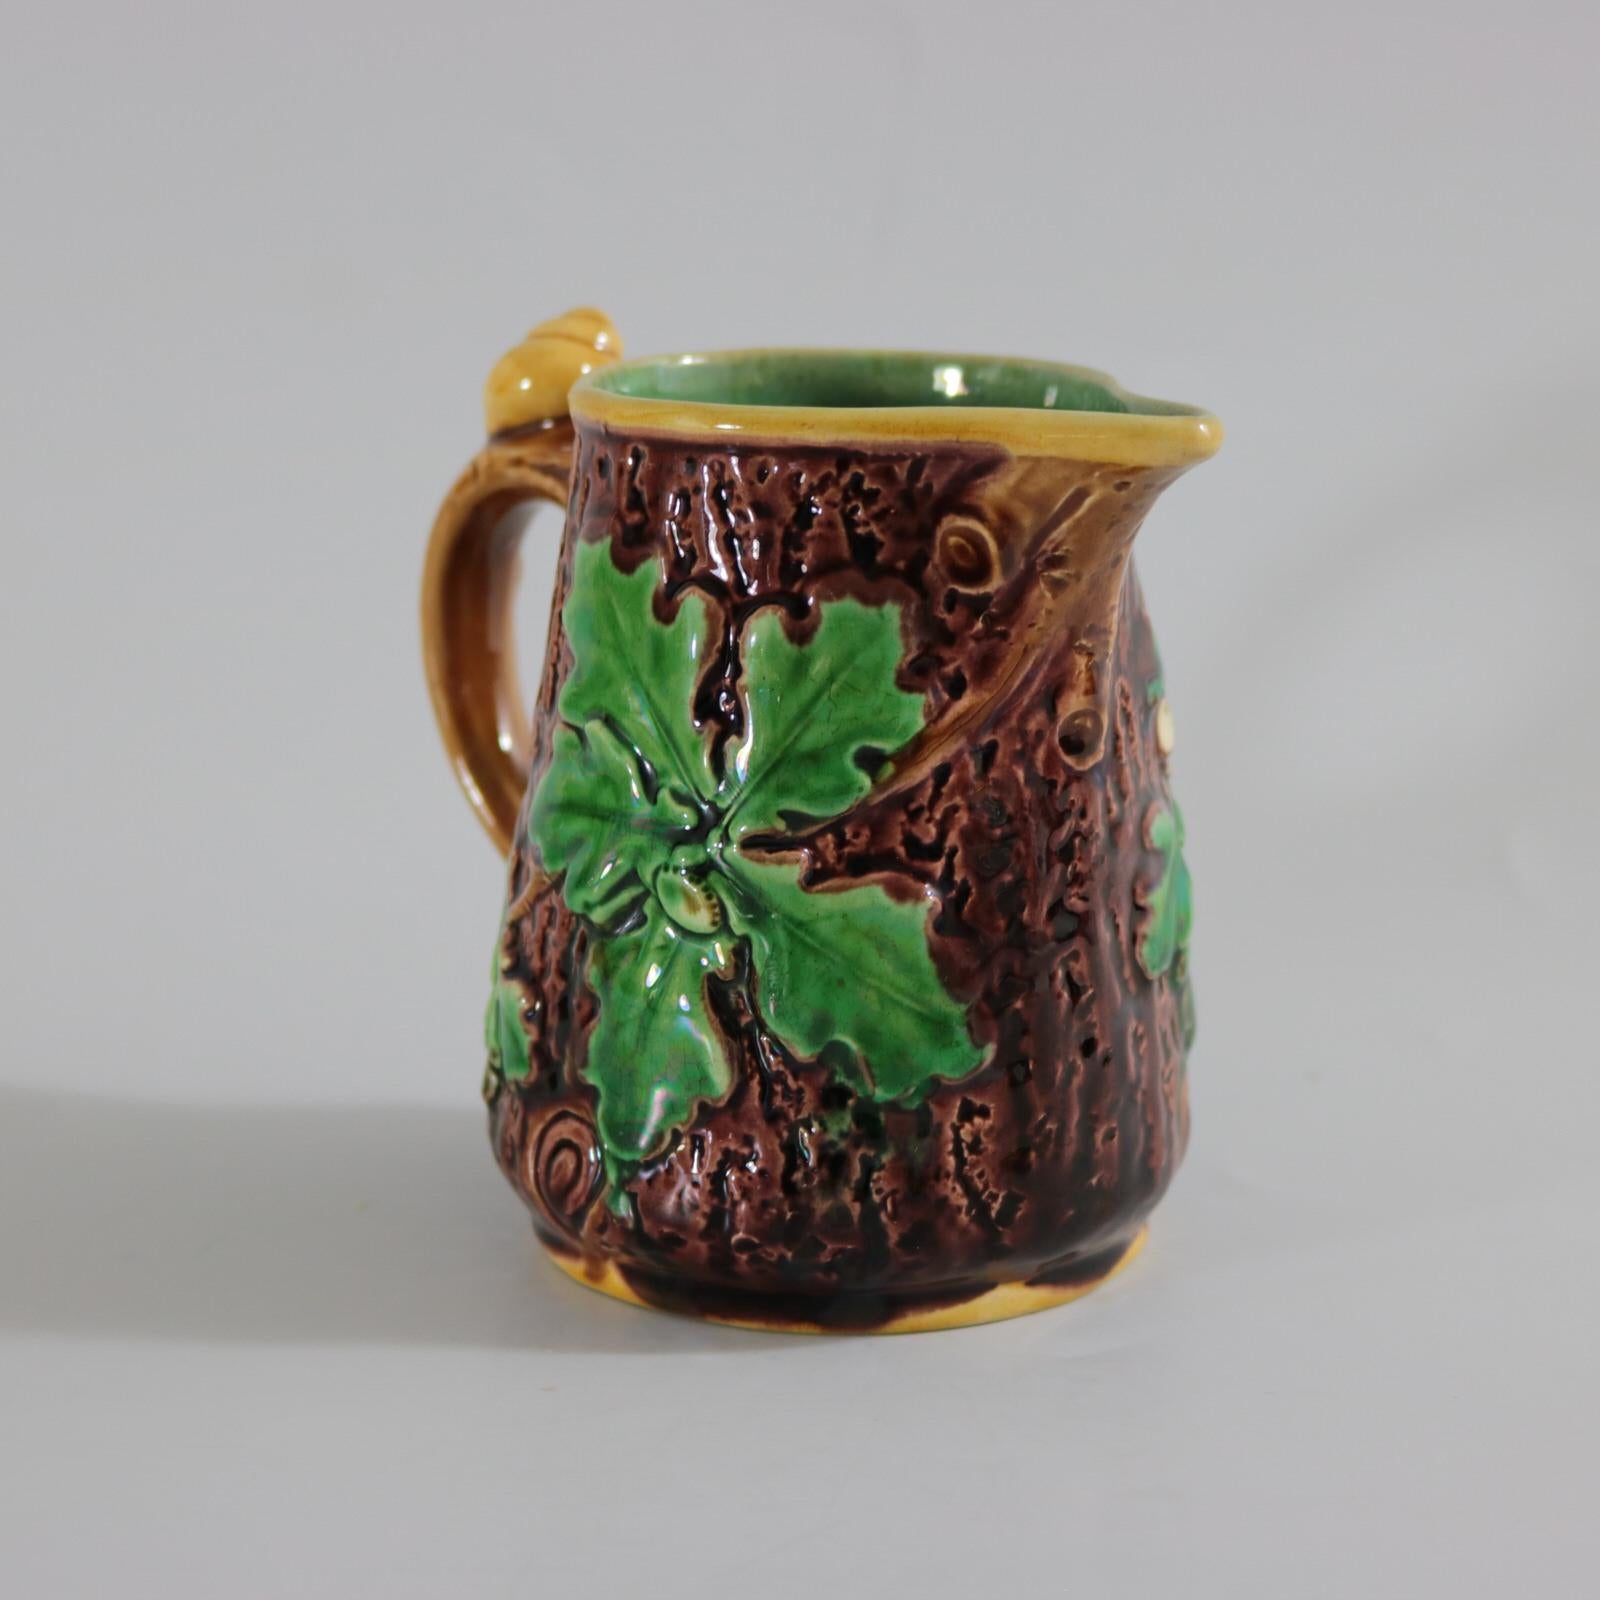 Minton Majolica Oak Jug/Pitcher with Snail Handle In Good Condition For Sale In Chelmsford, Essex